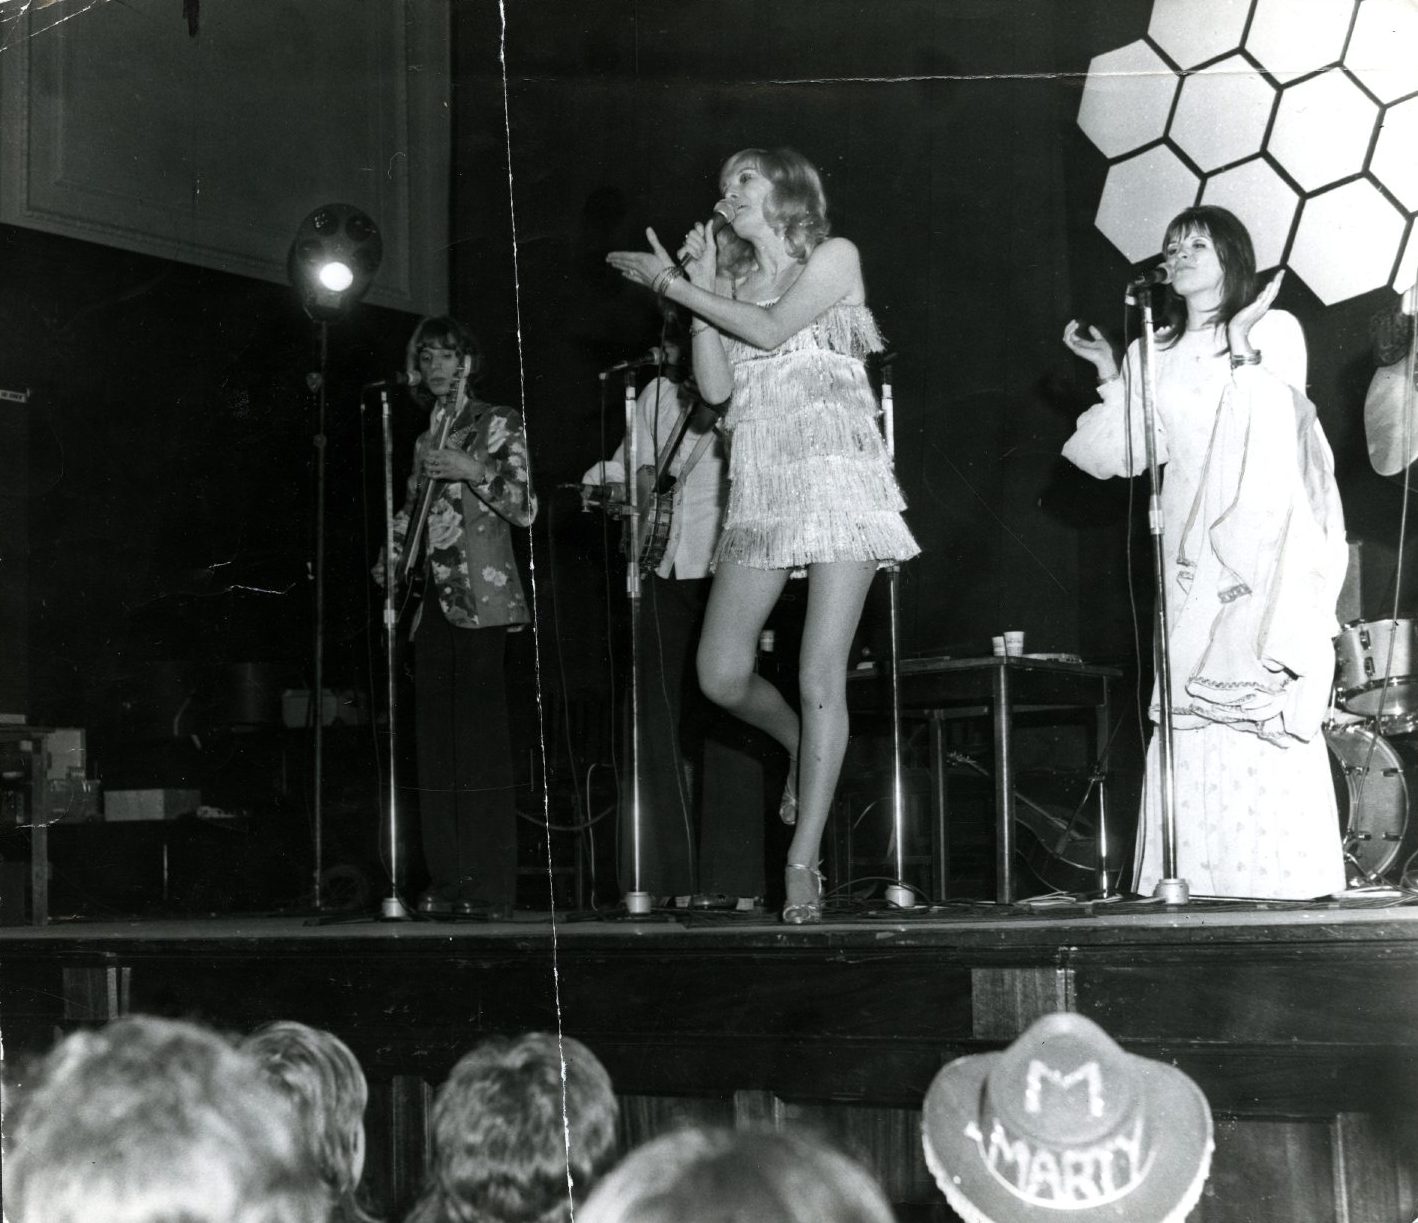 The New Seekers perform at the Caird Hall, Dundee, in April 1973.